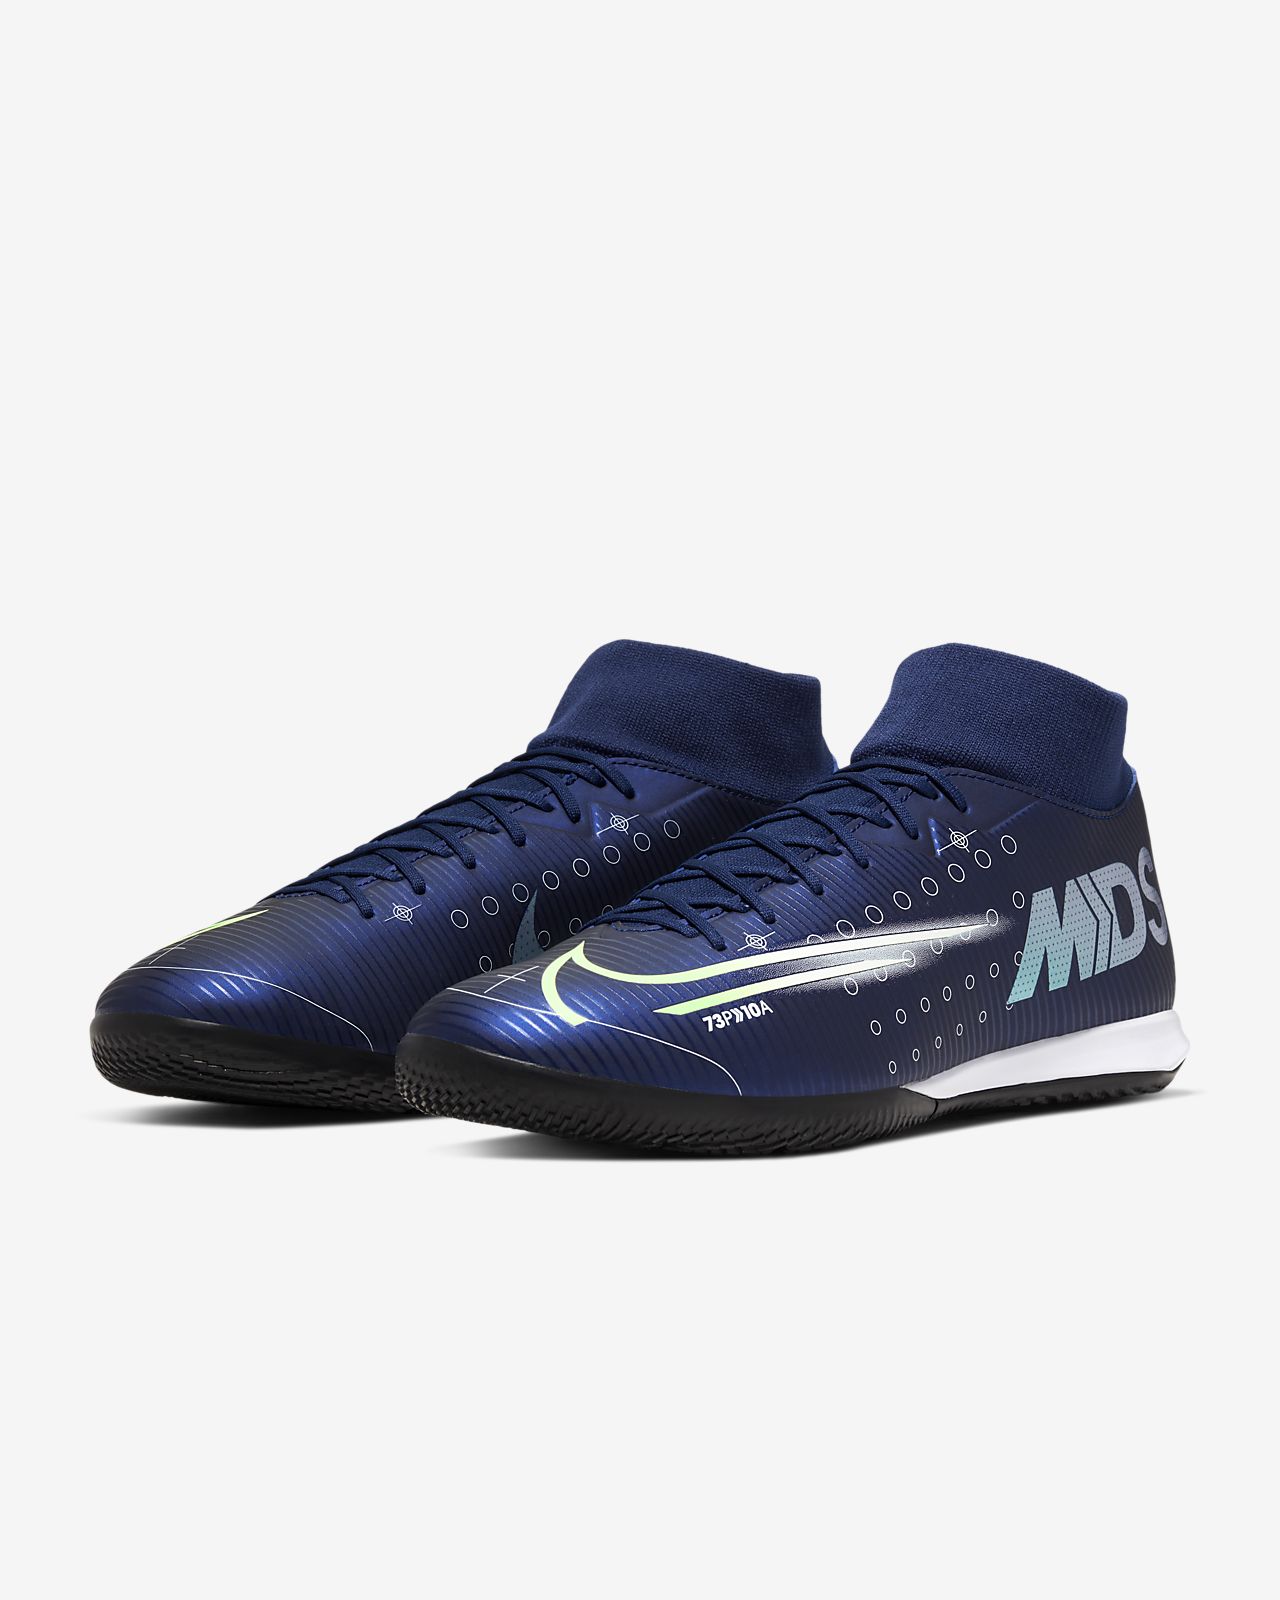 Nike jr. Mercurial Superfly 7 Academy IC Amazon.ca Shoes.